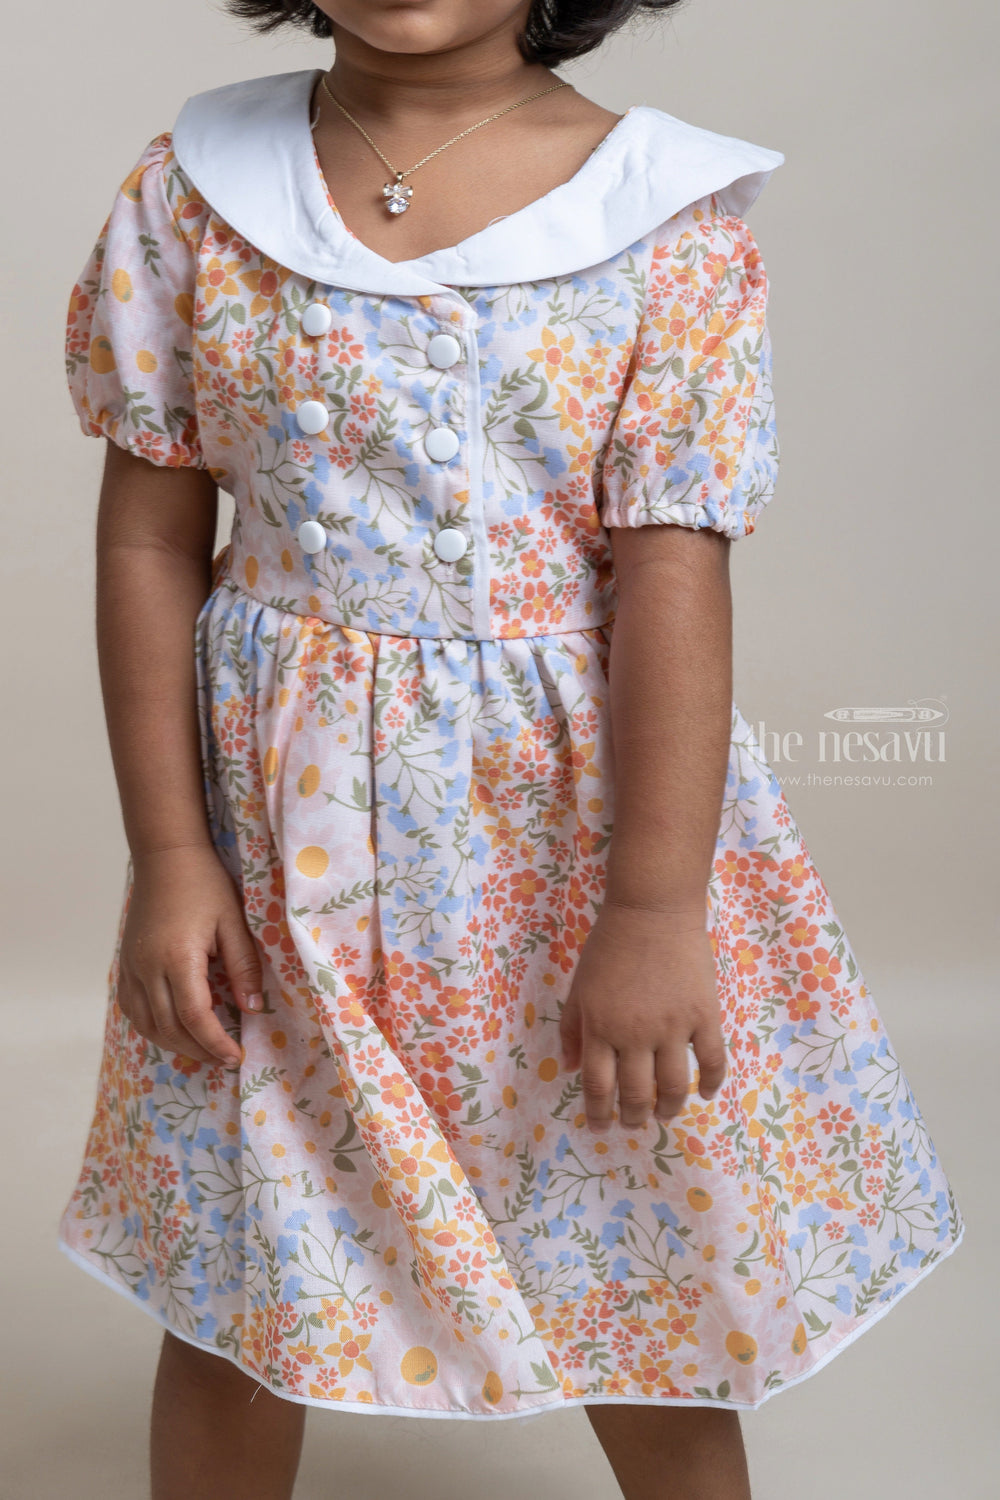 The Nesavu Girls Fancy Frock Fantastic Yellow Floral Allover Printed Cotton Frock For Girls Nesavu Trendy Floral Printed Frocks Online | New Arrivals | The Nesavu